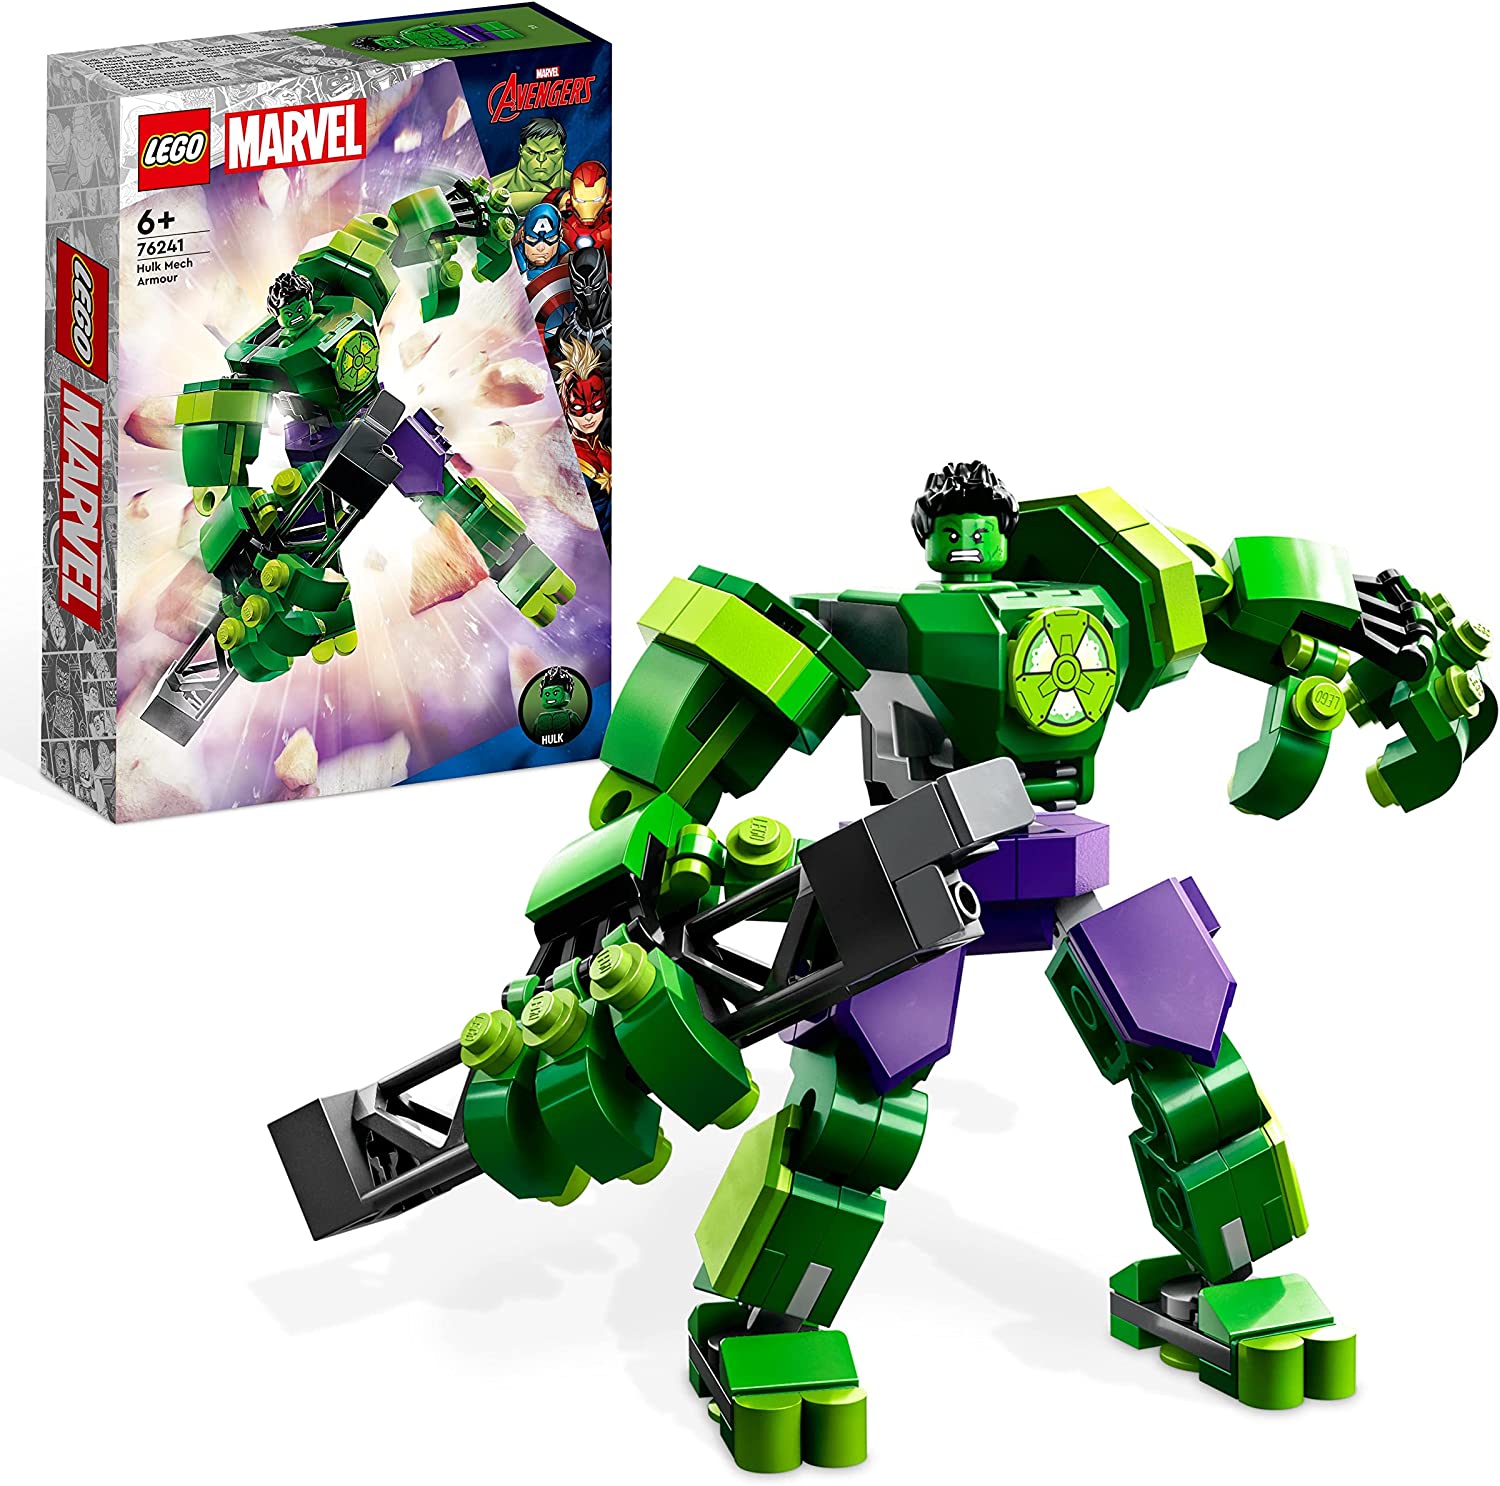 LEGO 76241 Marvel Hulk Mech Avengers Superhero Action Figure, Collectable Building Toy for Boys and Girls from 6 Years